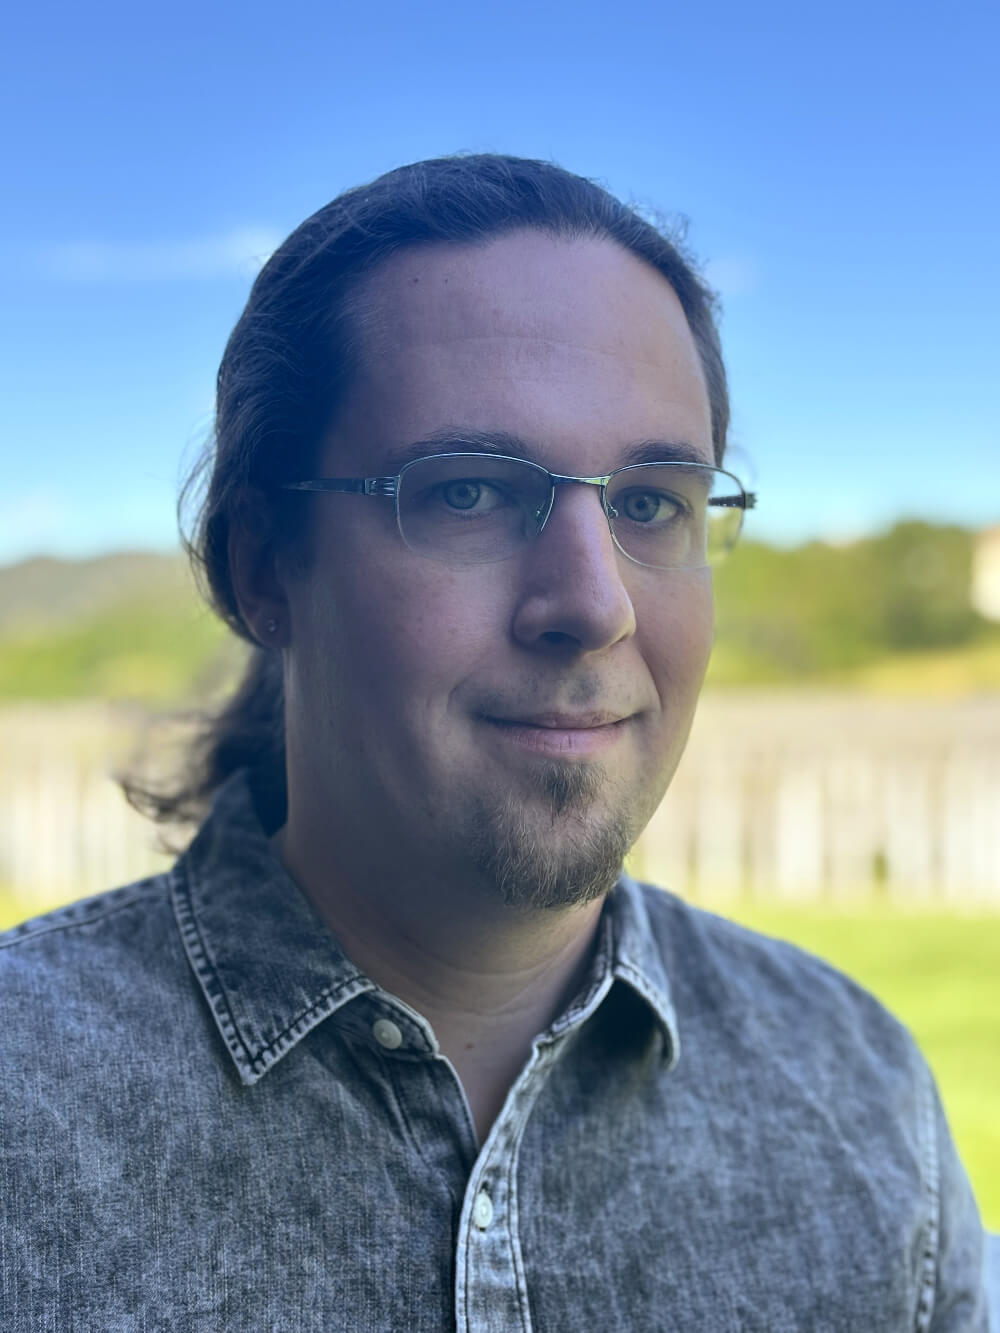 headshot of brandon hubler. 30's white male with glasses, goatee and ponytail, wearing black button up shirt. background is a blurry fenceline and mountain